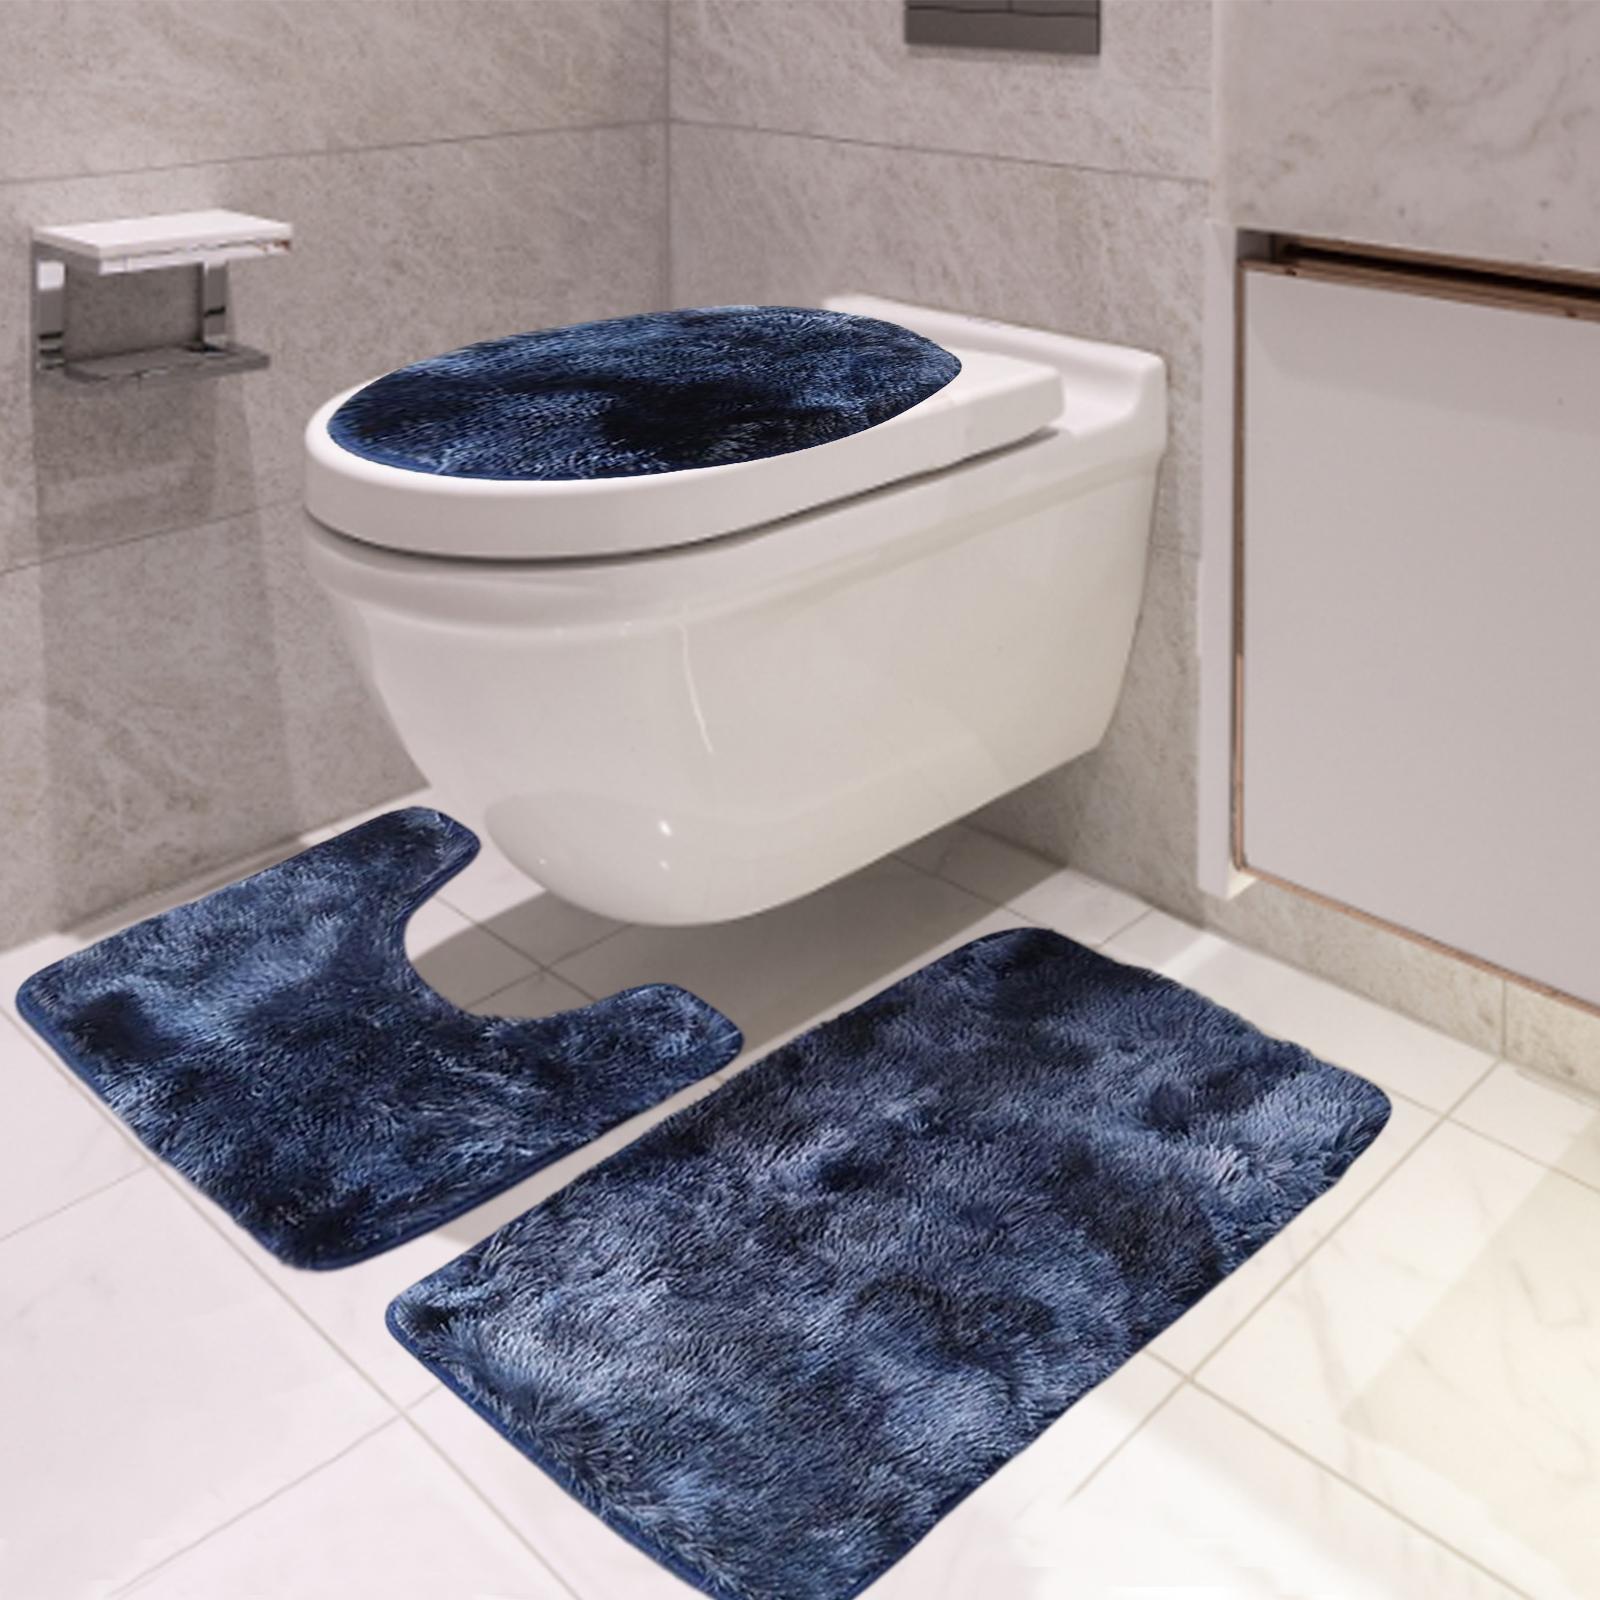 3x Bath Mats Set with Toilet Lid Cover Absorbent Large Carpet for Tub Blue